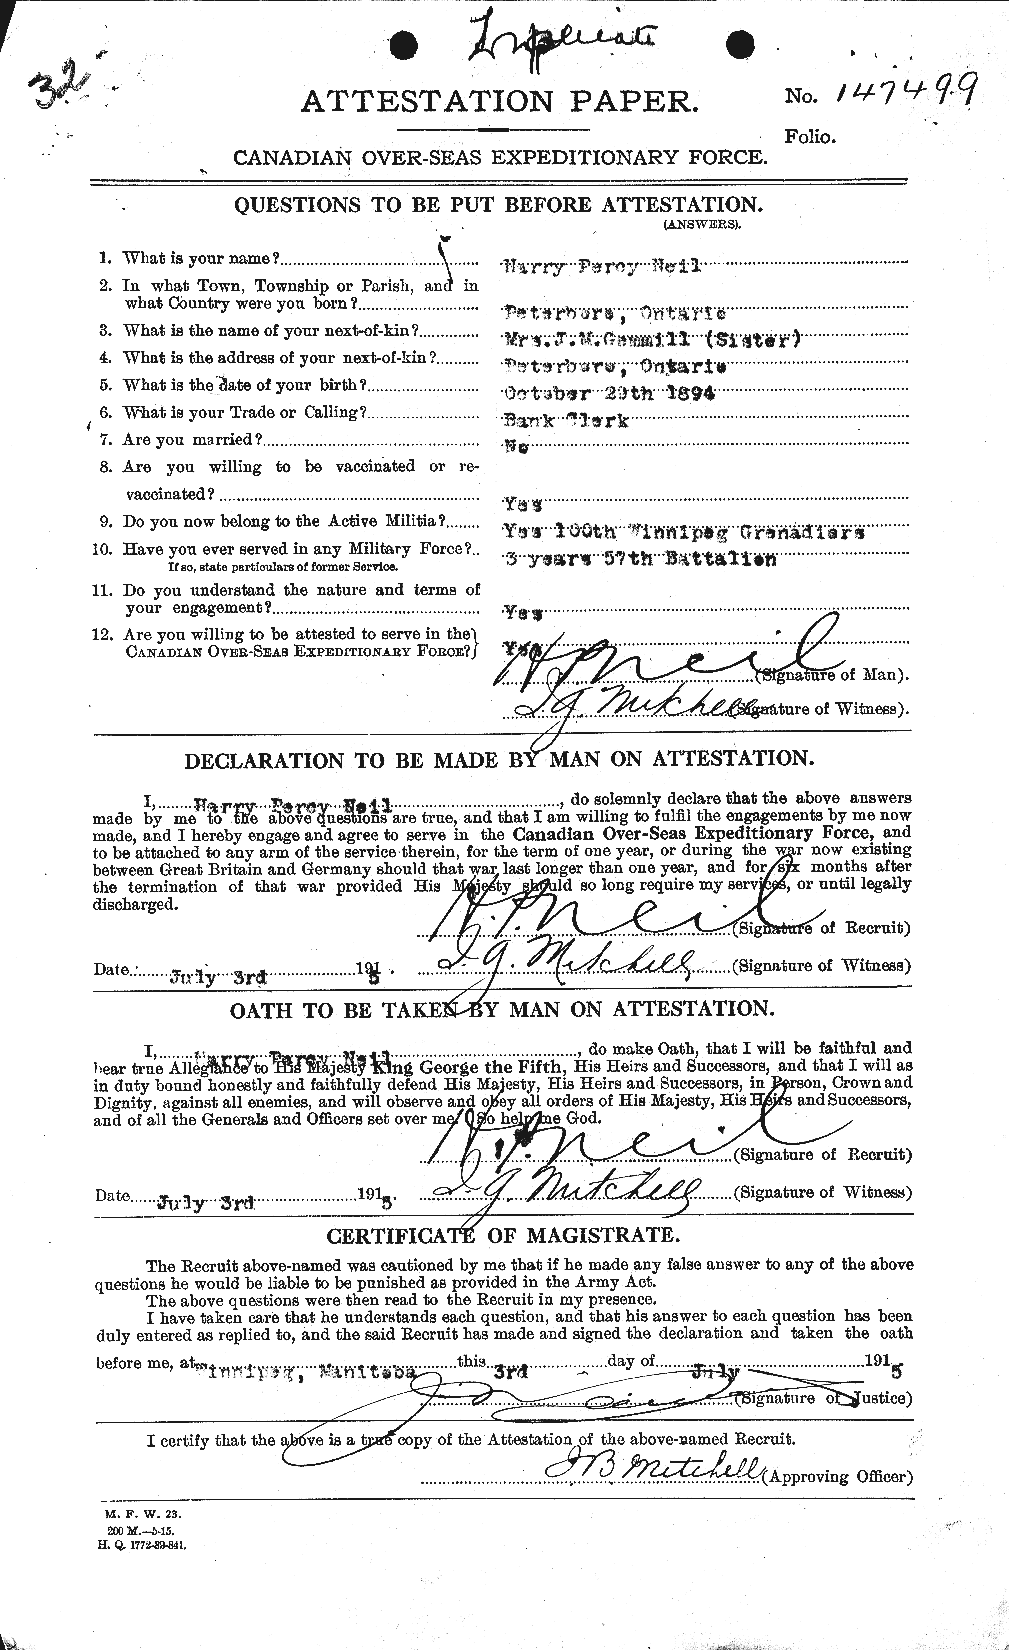 Personnel Records of the First World War - CEF 545584a